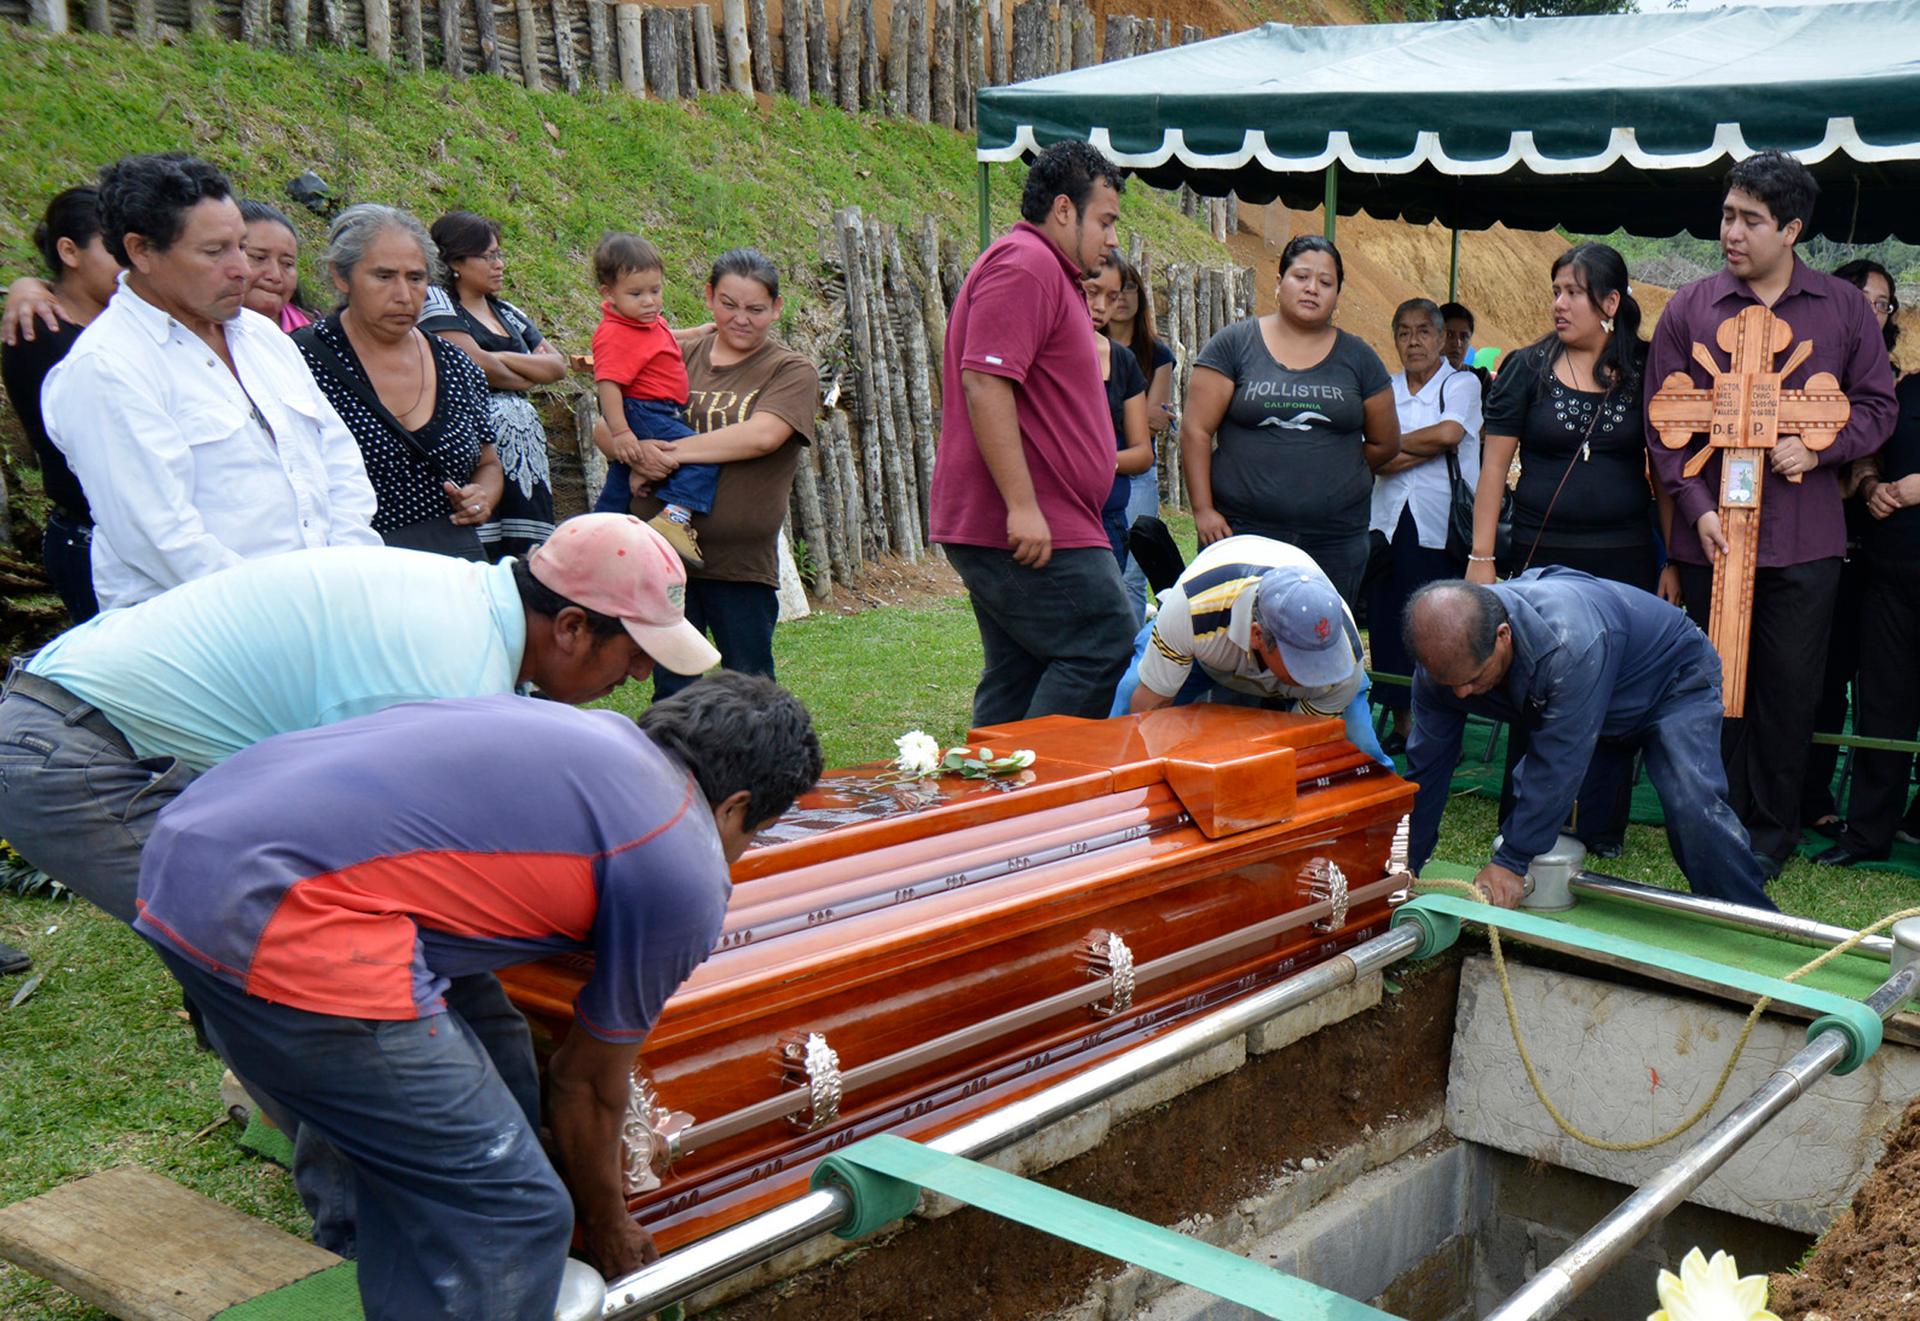 People and relatives stand next to the coffin of a murdered Mexican reporter named Victor Baez, during his funeral in Mexico's Veracruz state on June 15, 2012.